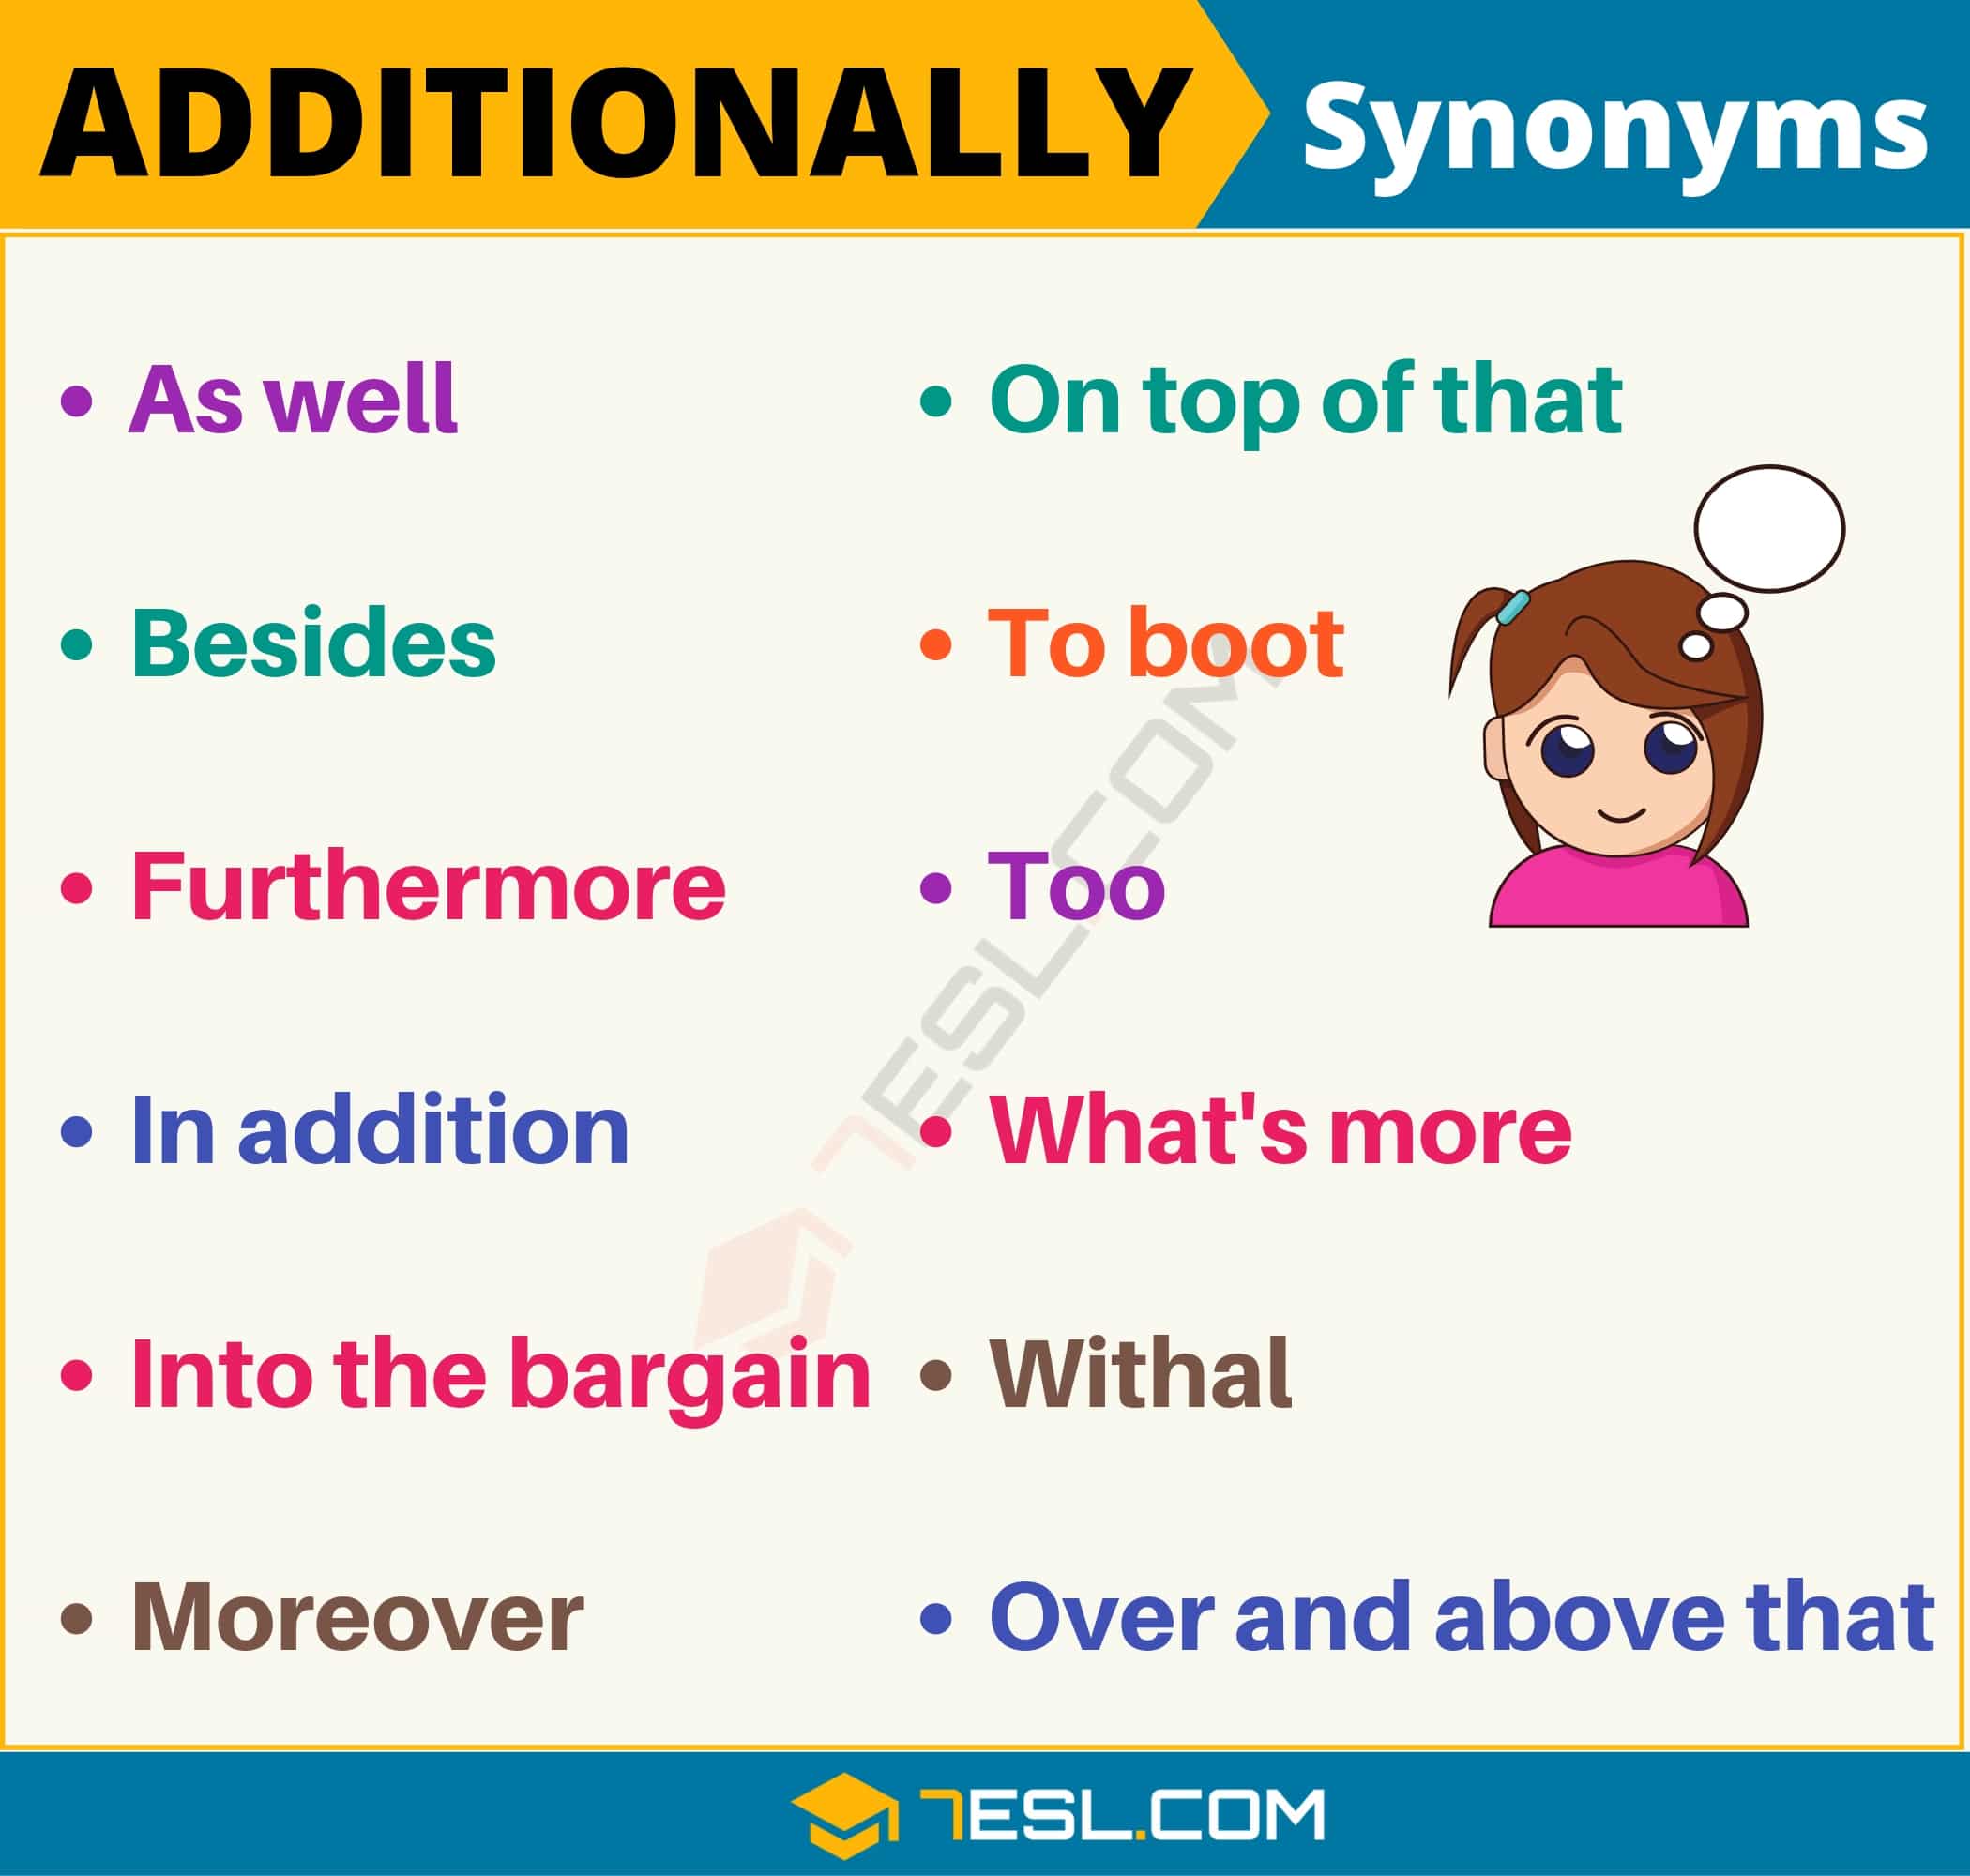 synonyms for besides